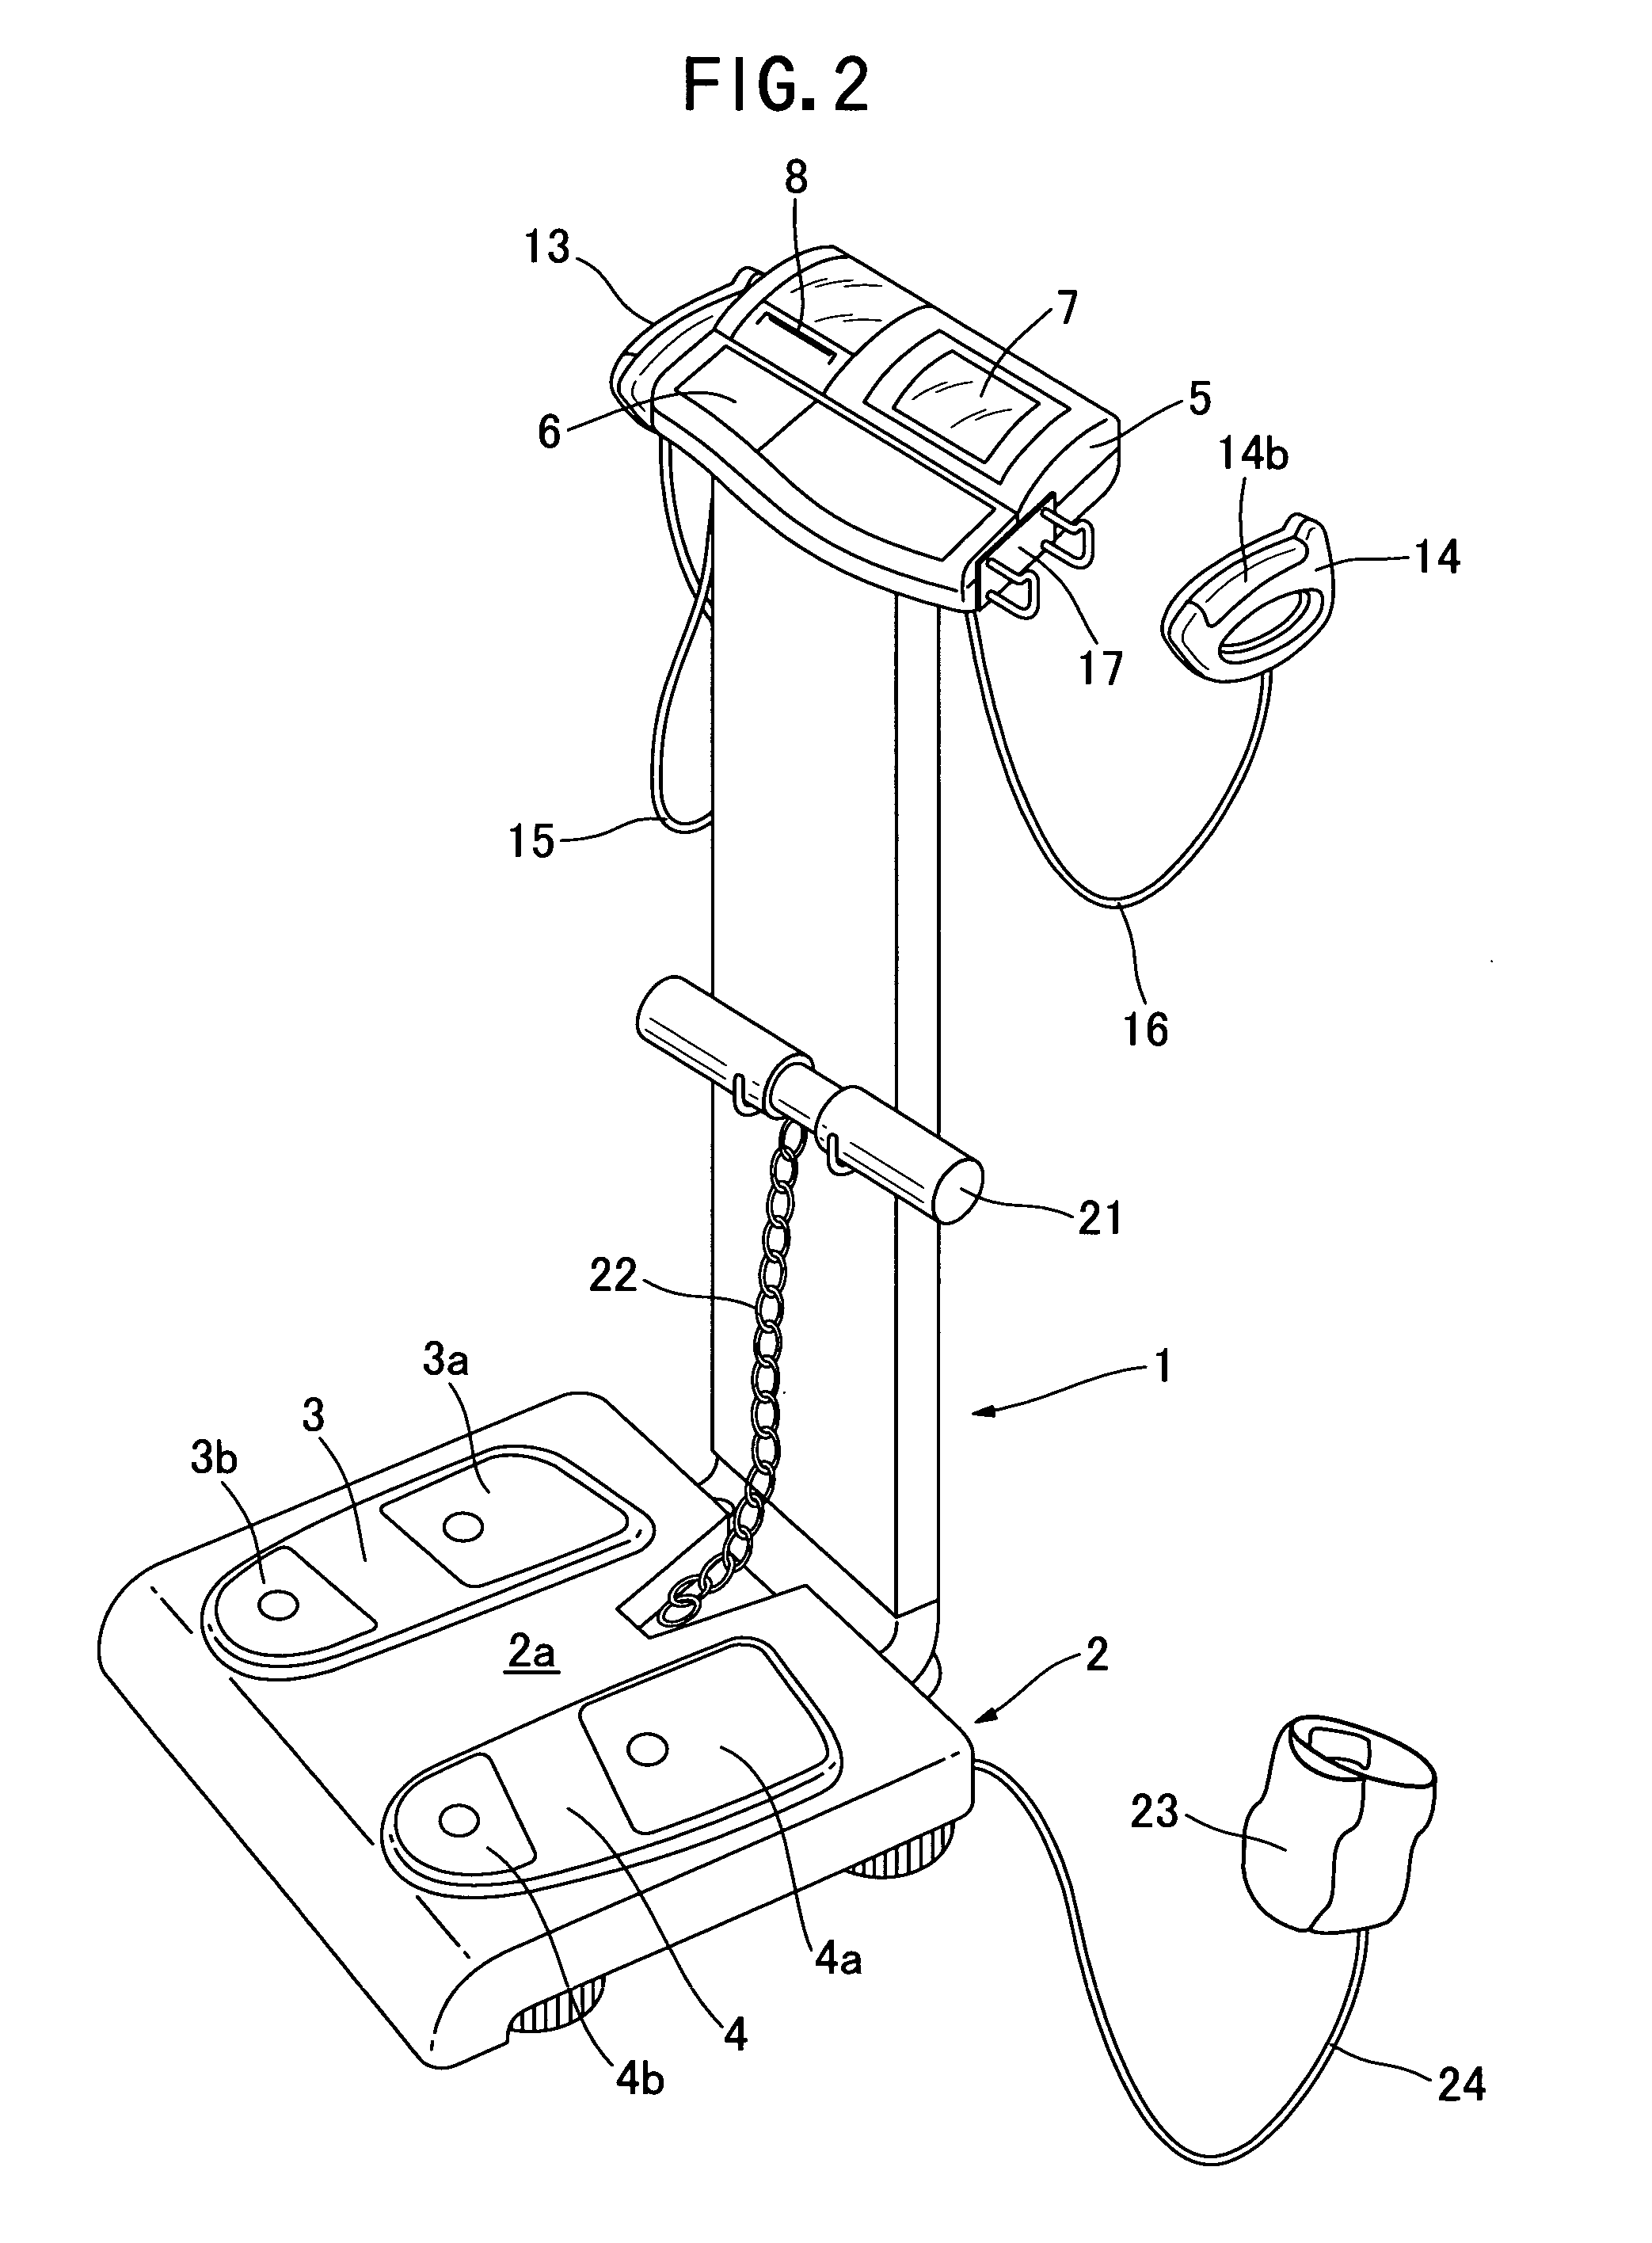 Muscle measuring device